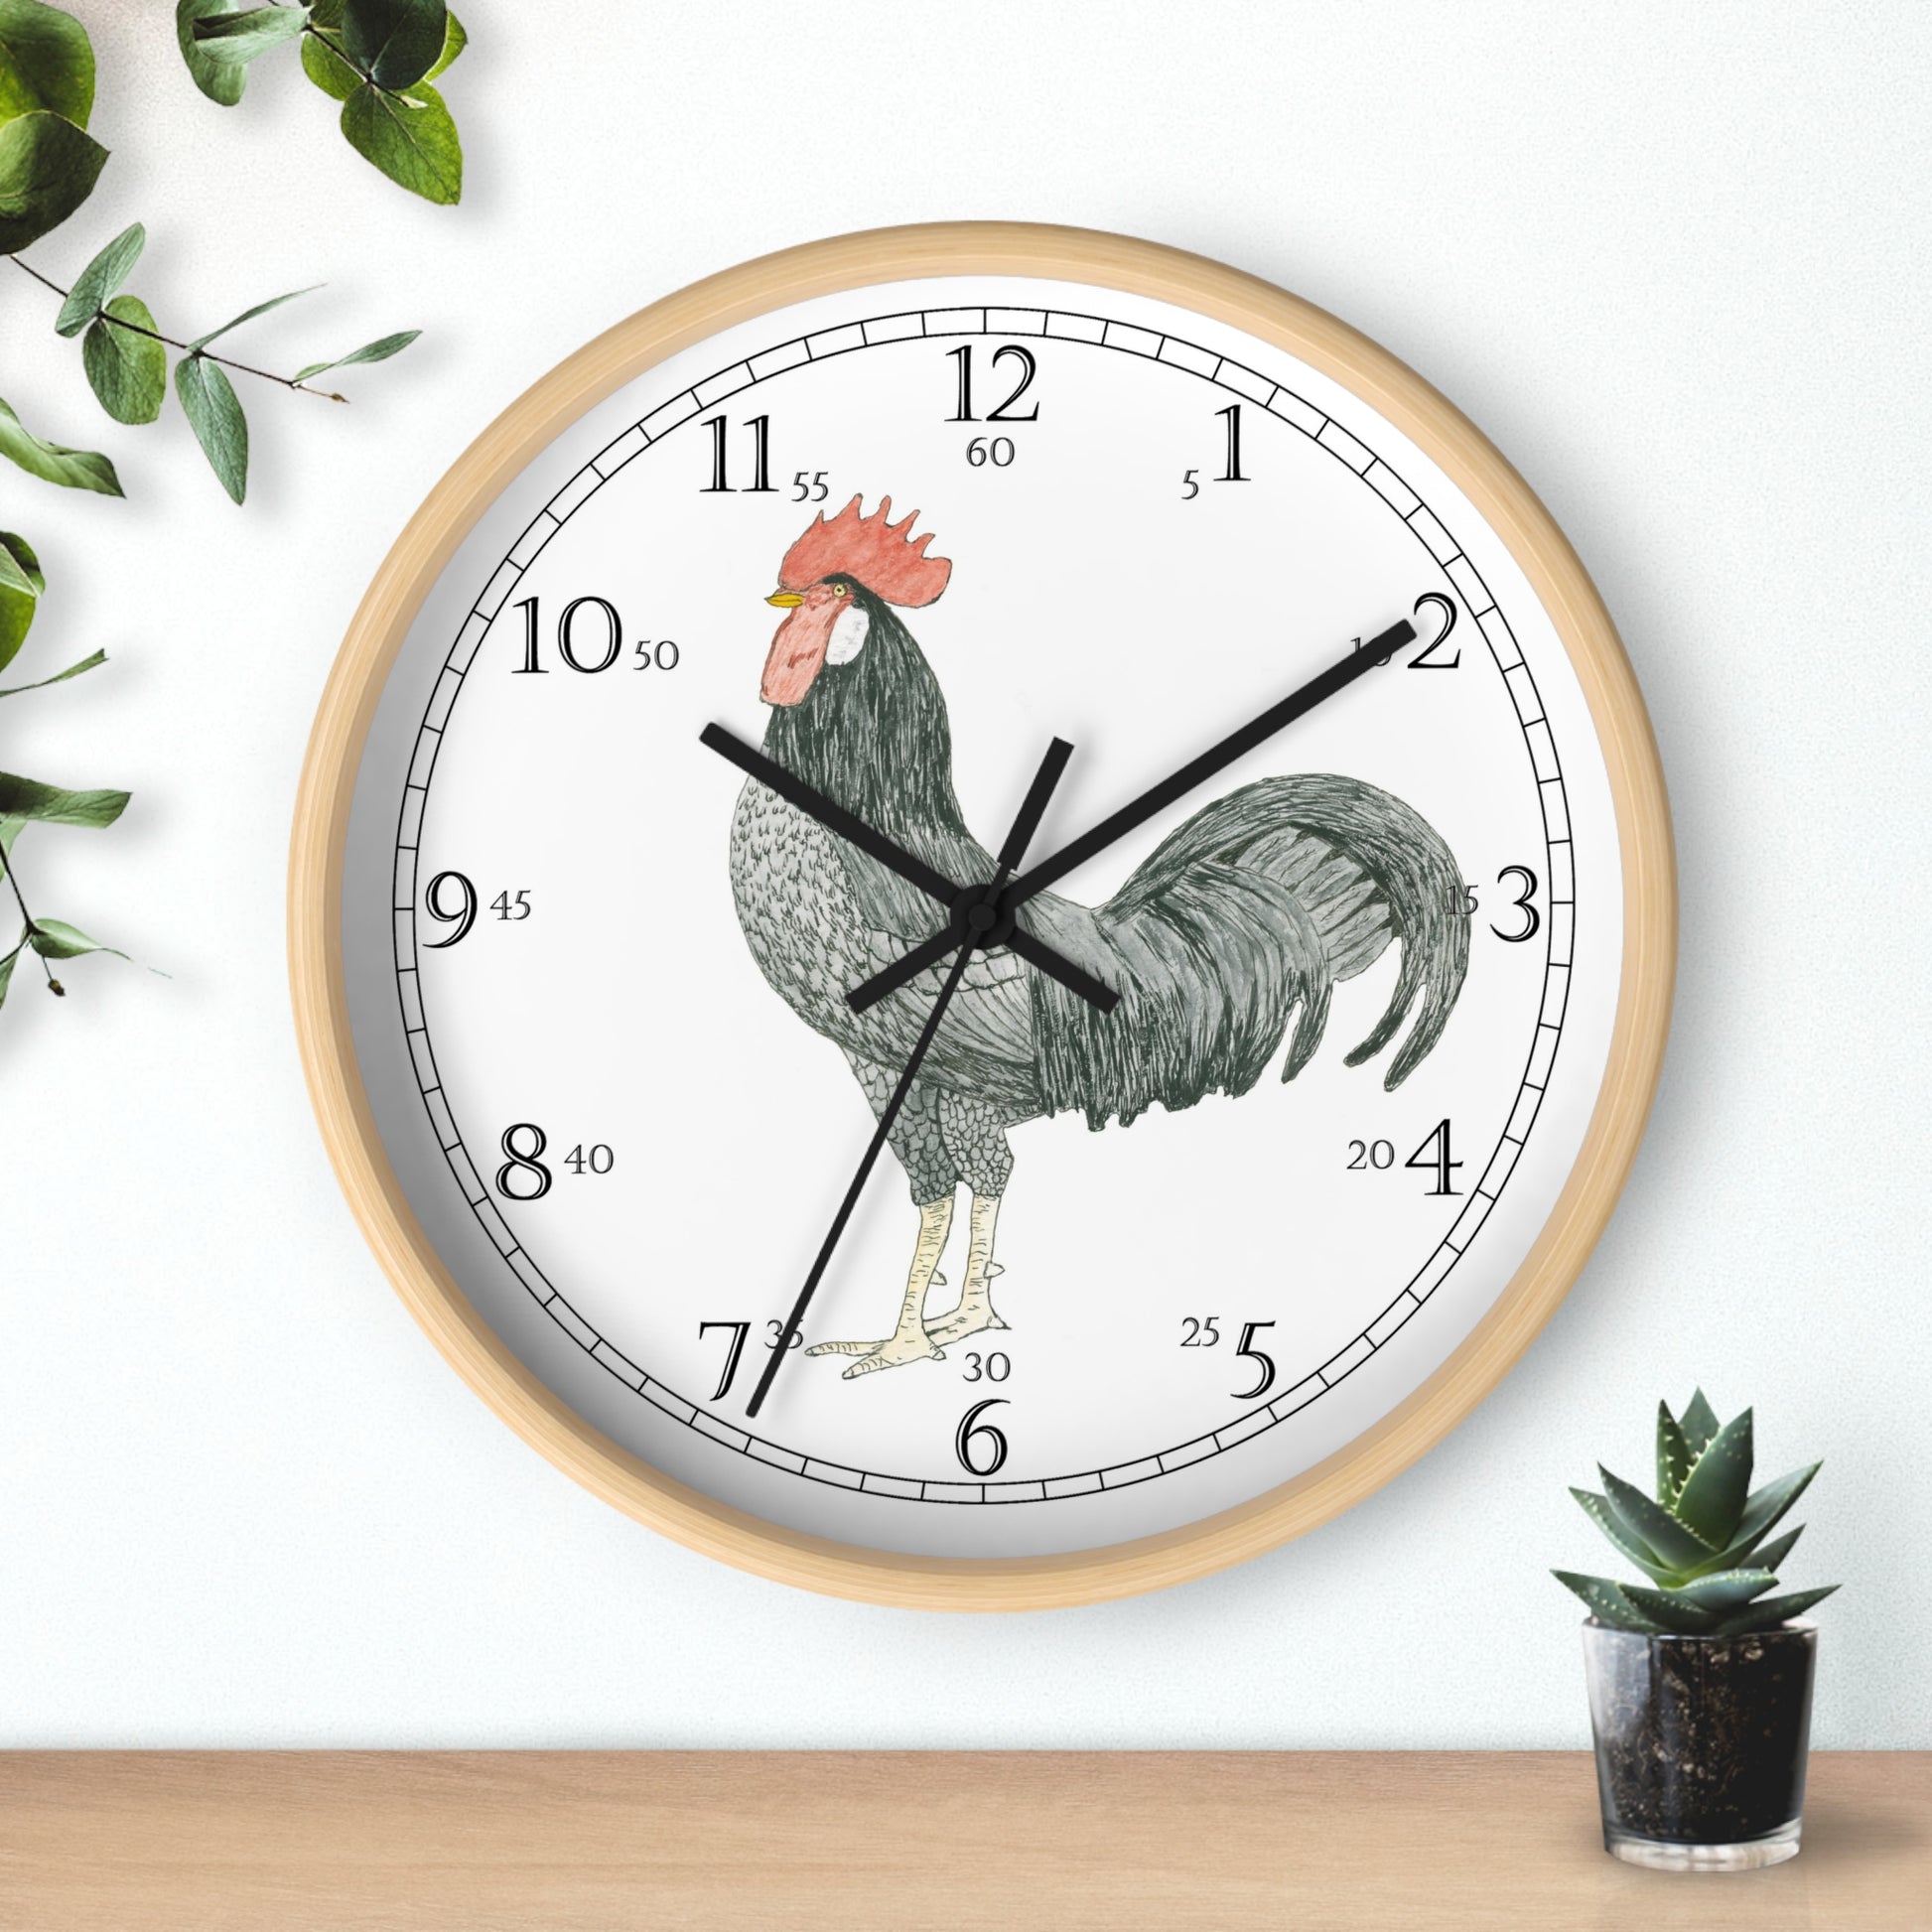 The Adam Rooster English Numeral Wall Clock will keep you on time